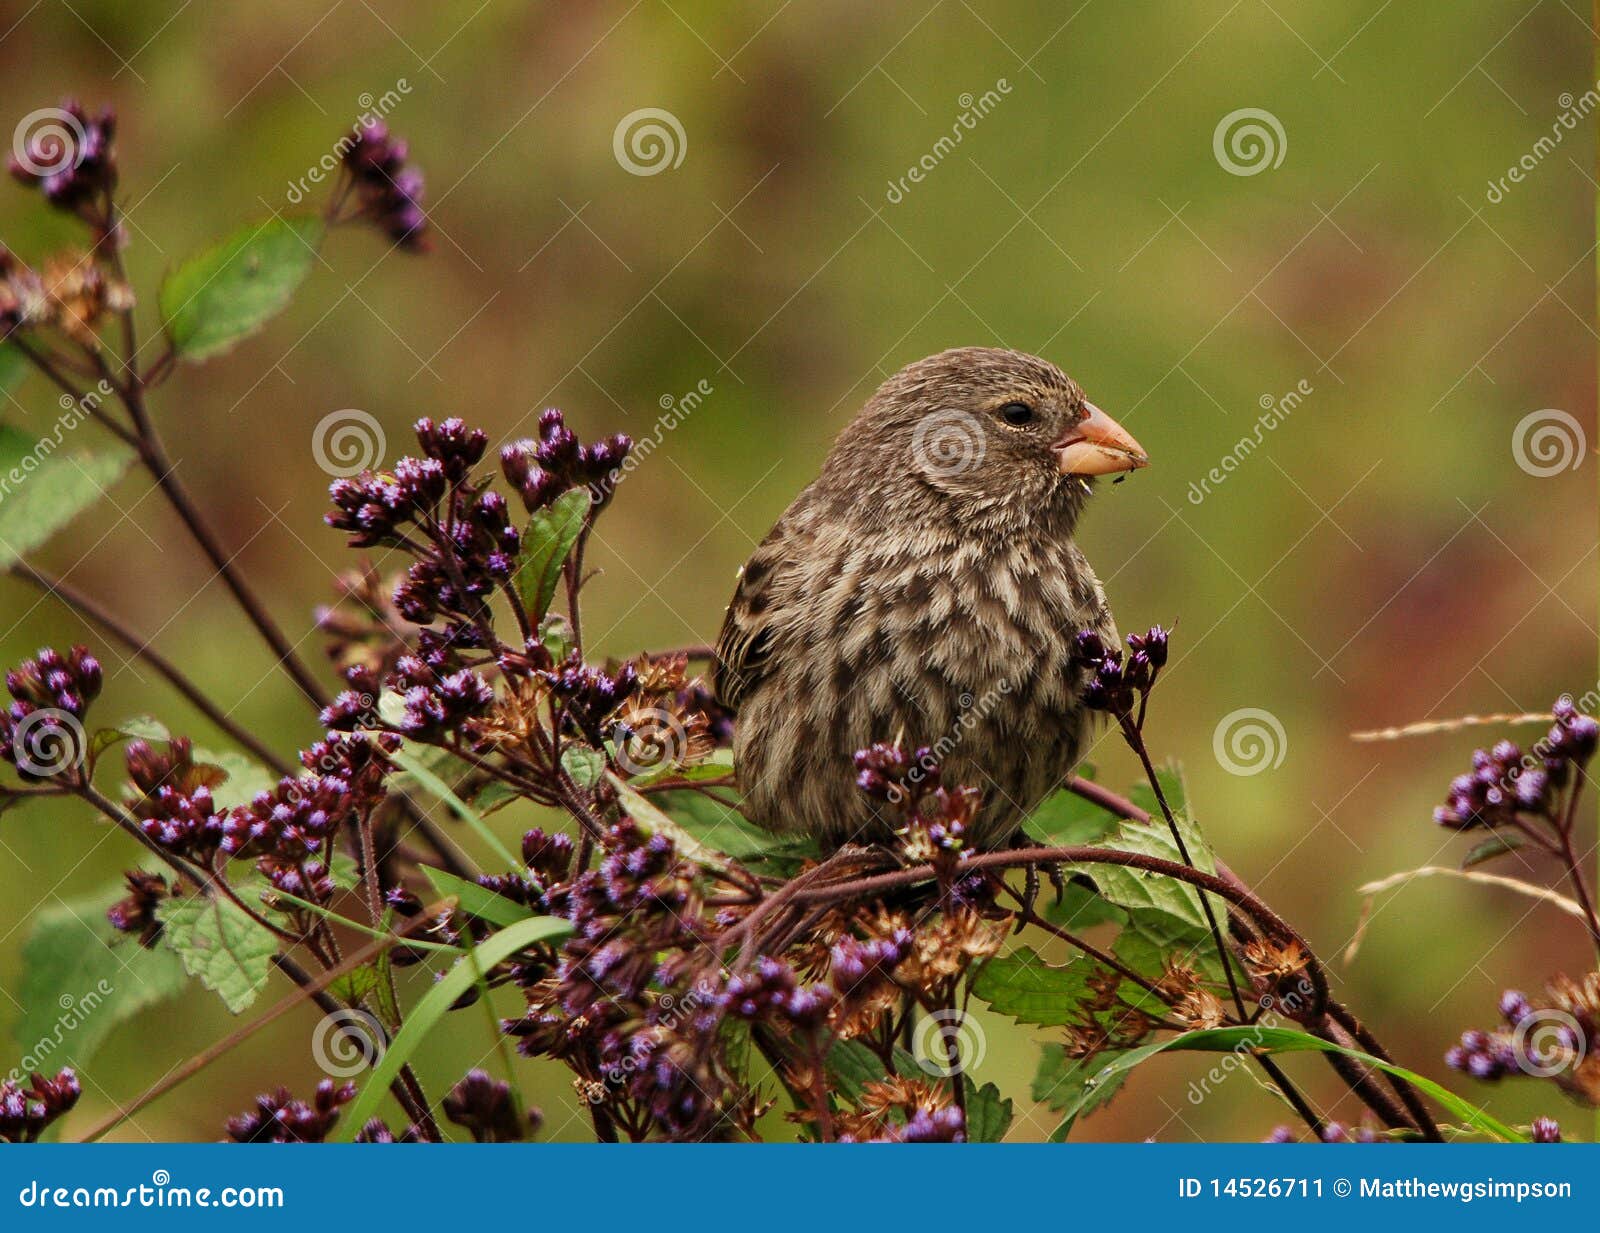 galapagos small ground finch